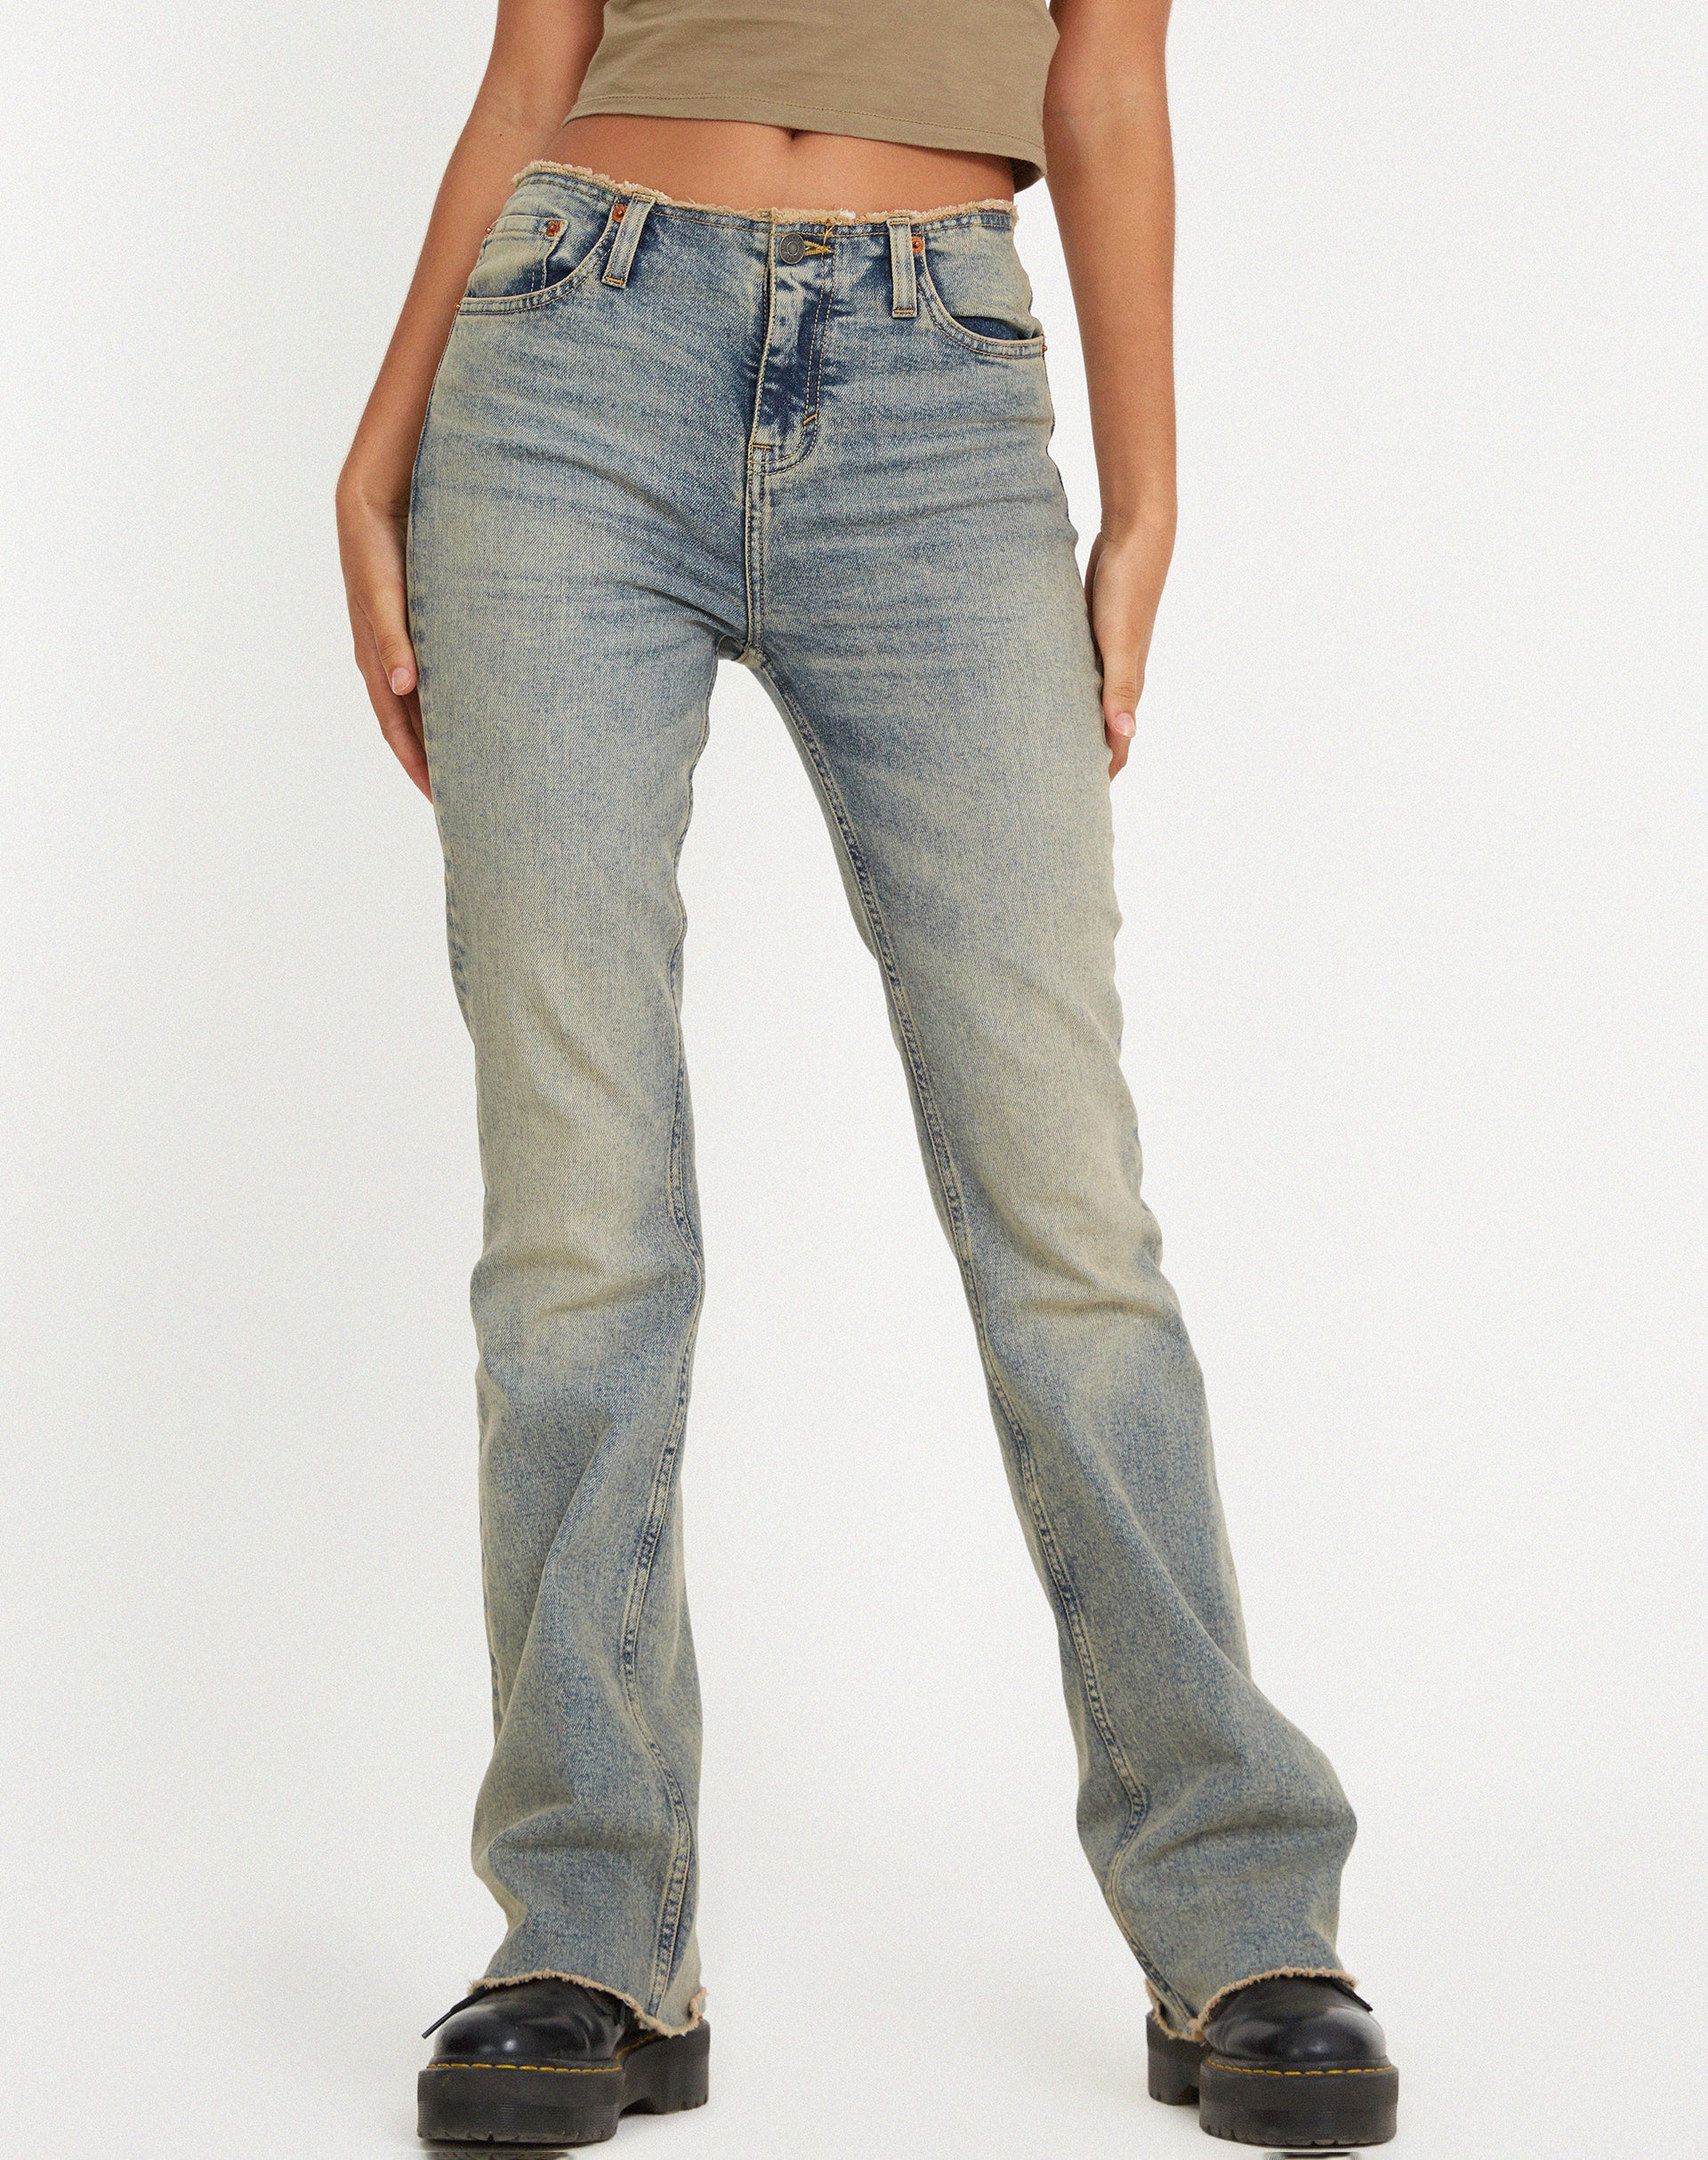 image of Frayed Low Rise Jeans in Light Wash Sandy Tint